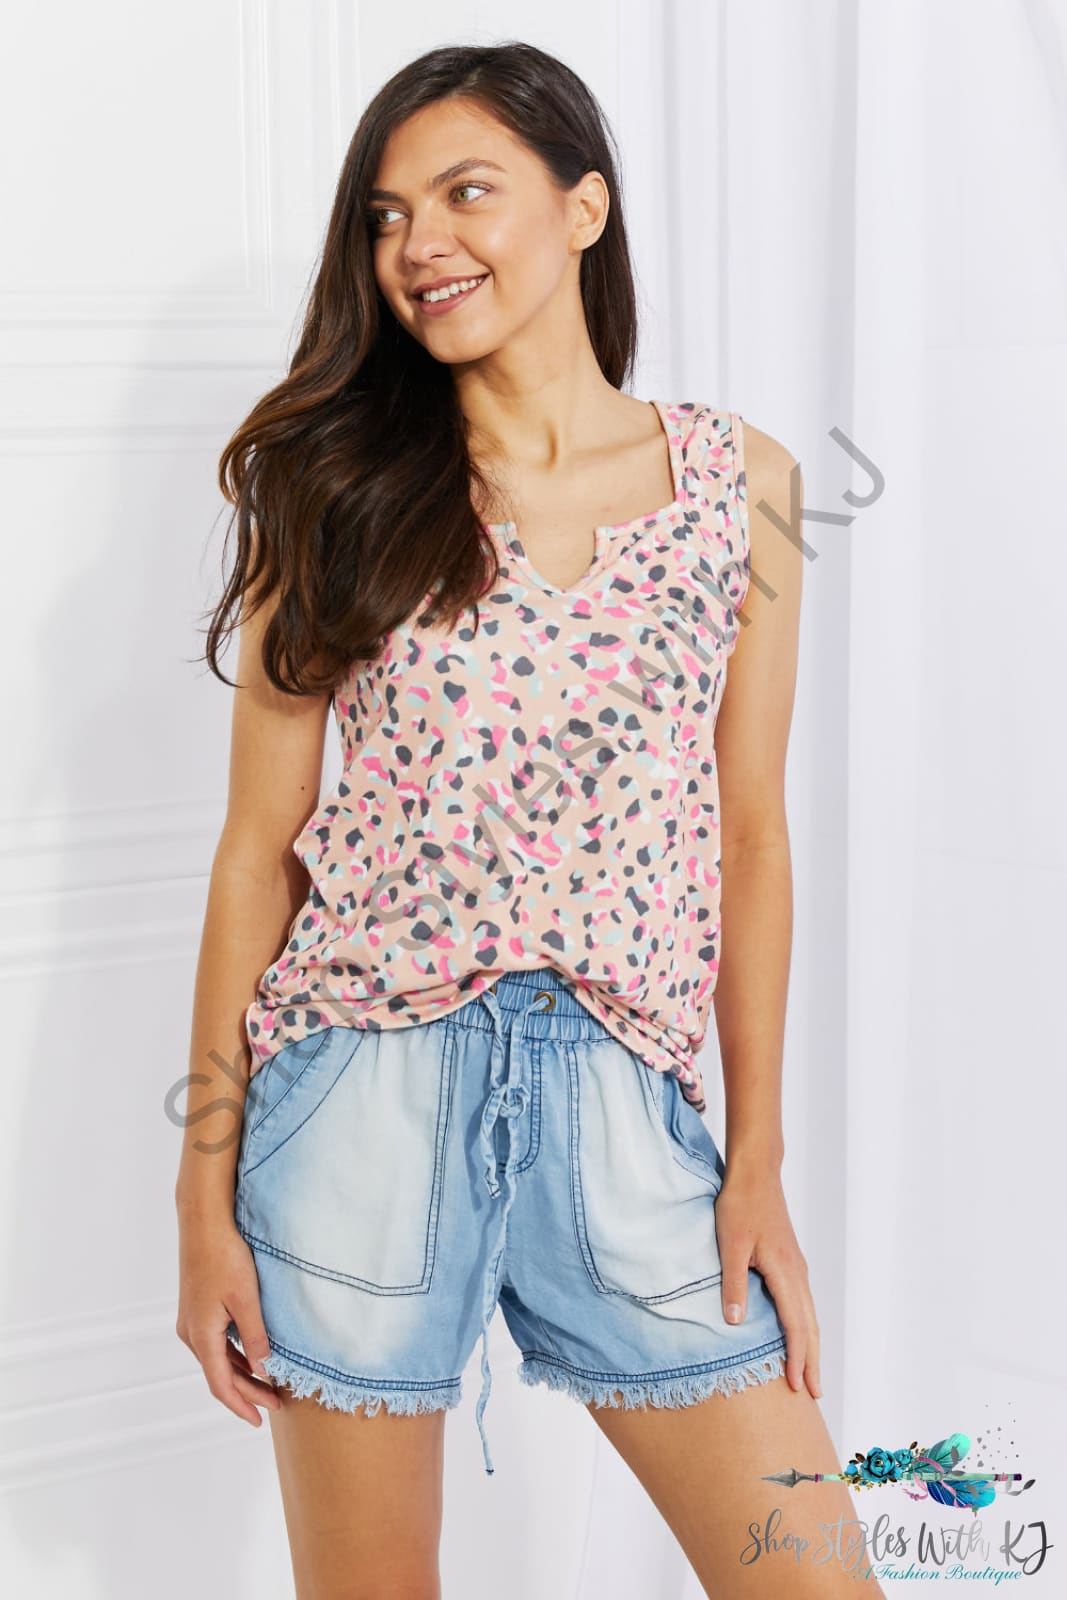 Surprise Party Printed Sleeveless Top Shirts & Tops